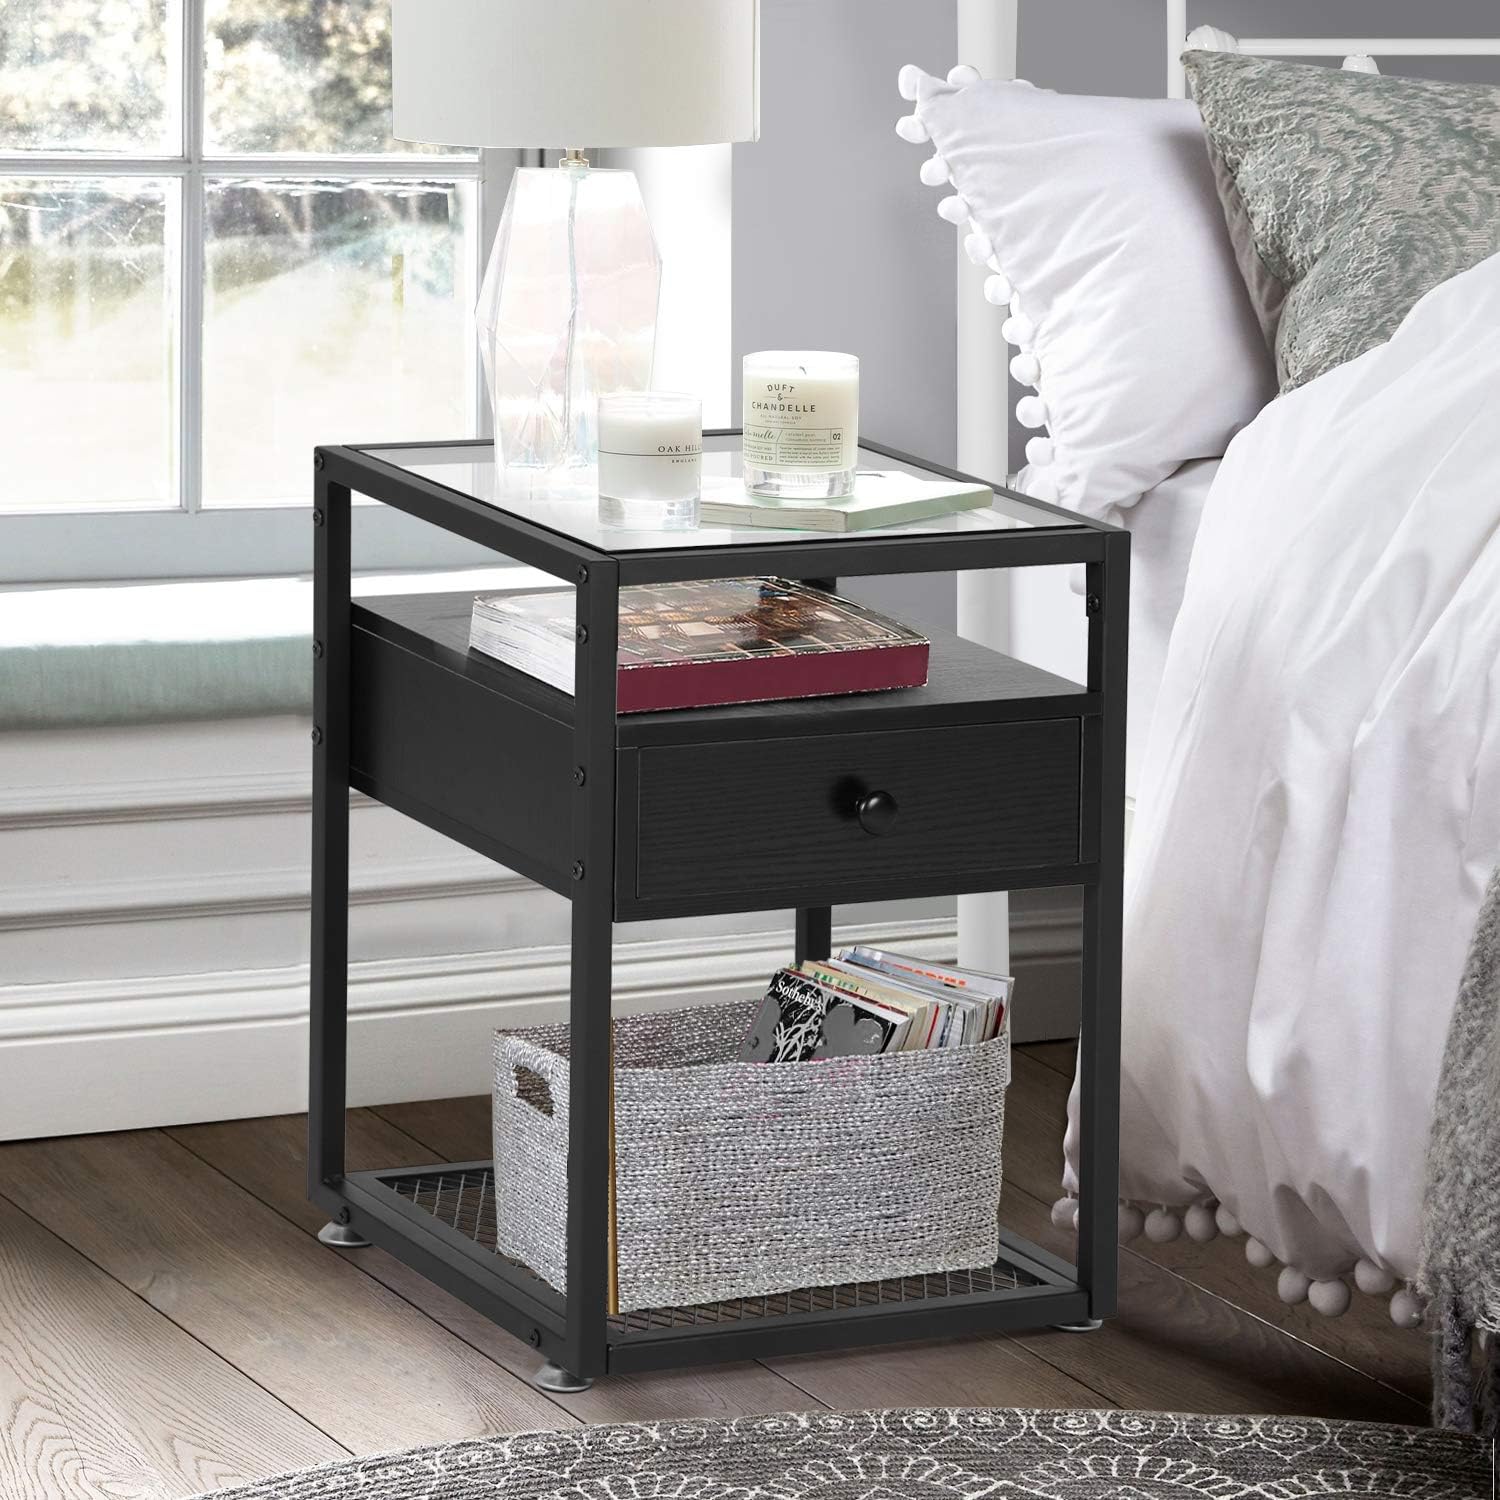 VECELO Nightstands,Glass Top End Tables with Drawer and Shelf